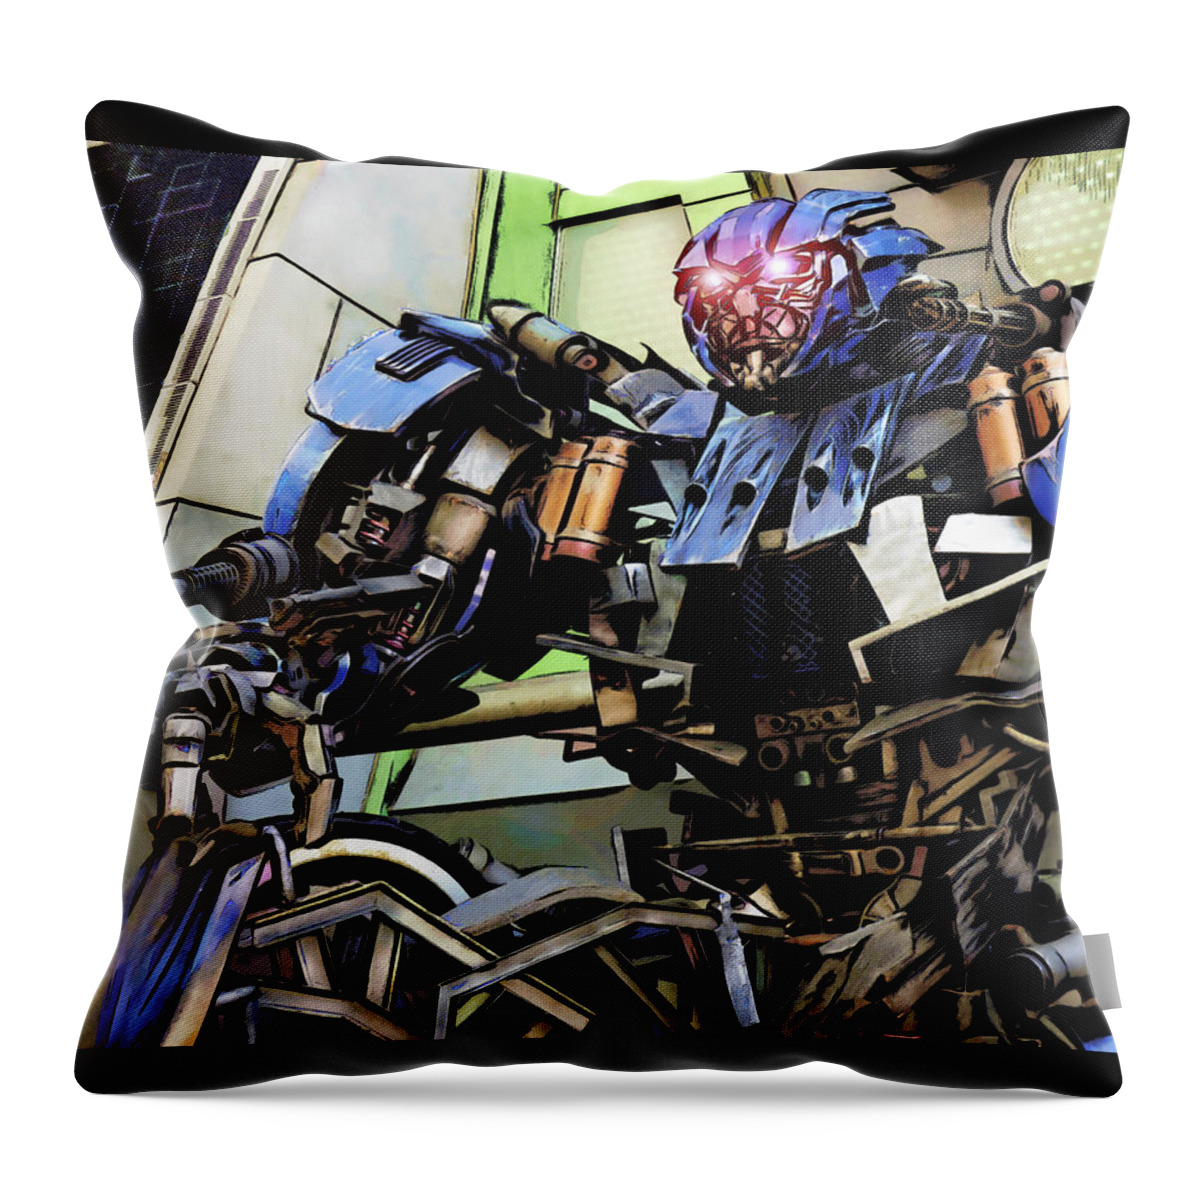 Theres A Thin Line Between Being A Hero And Being A Memory Throw Pillow featuring the photograph Between Being a Hero and Being a Memory by Steve Taylor